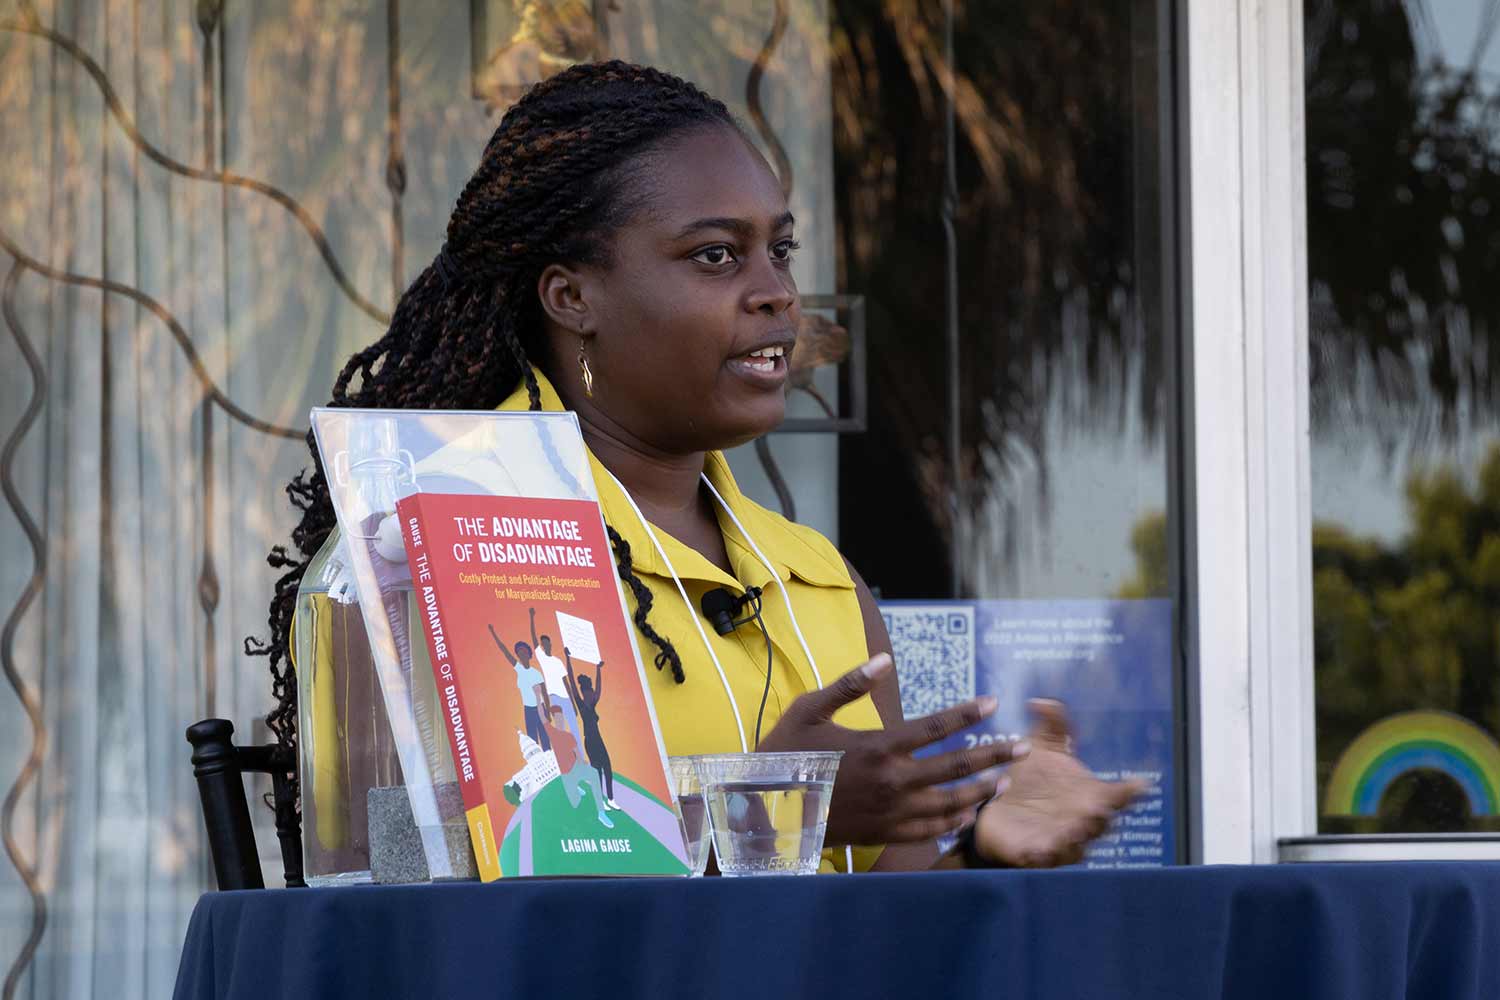 Political scientist LaGina Gause discussing her book at event in North Park